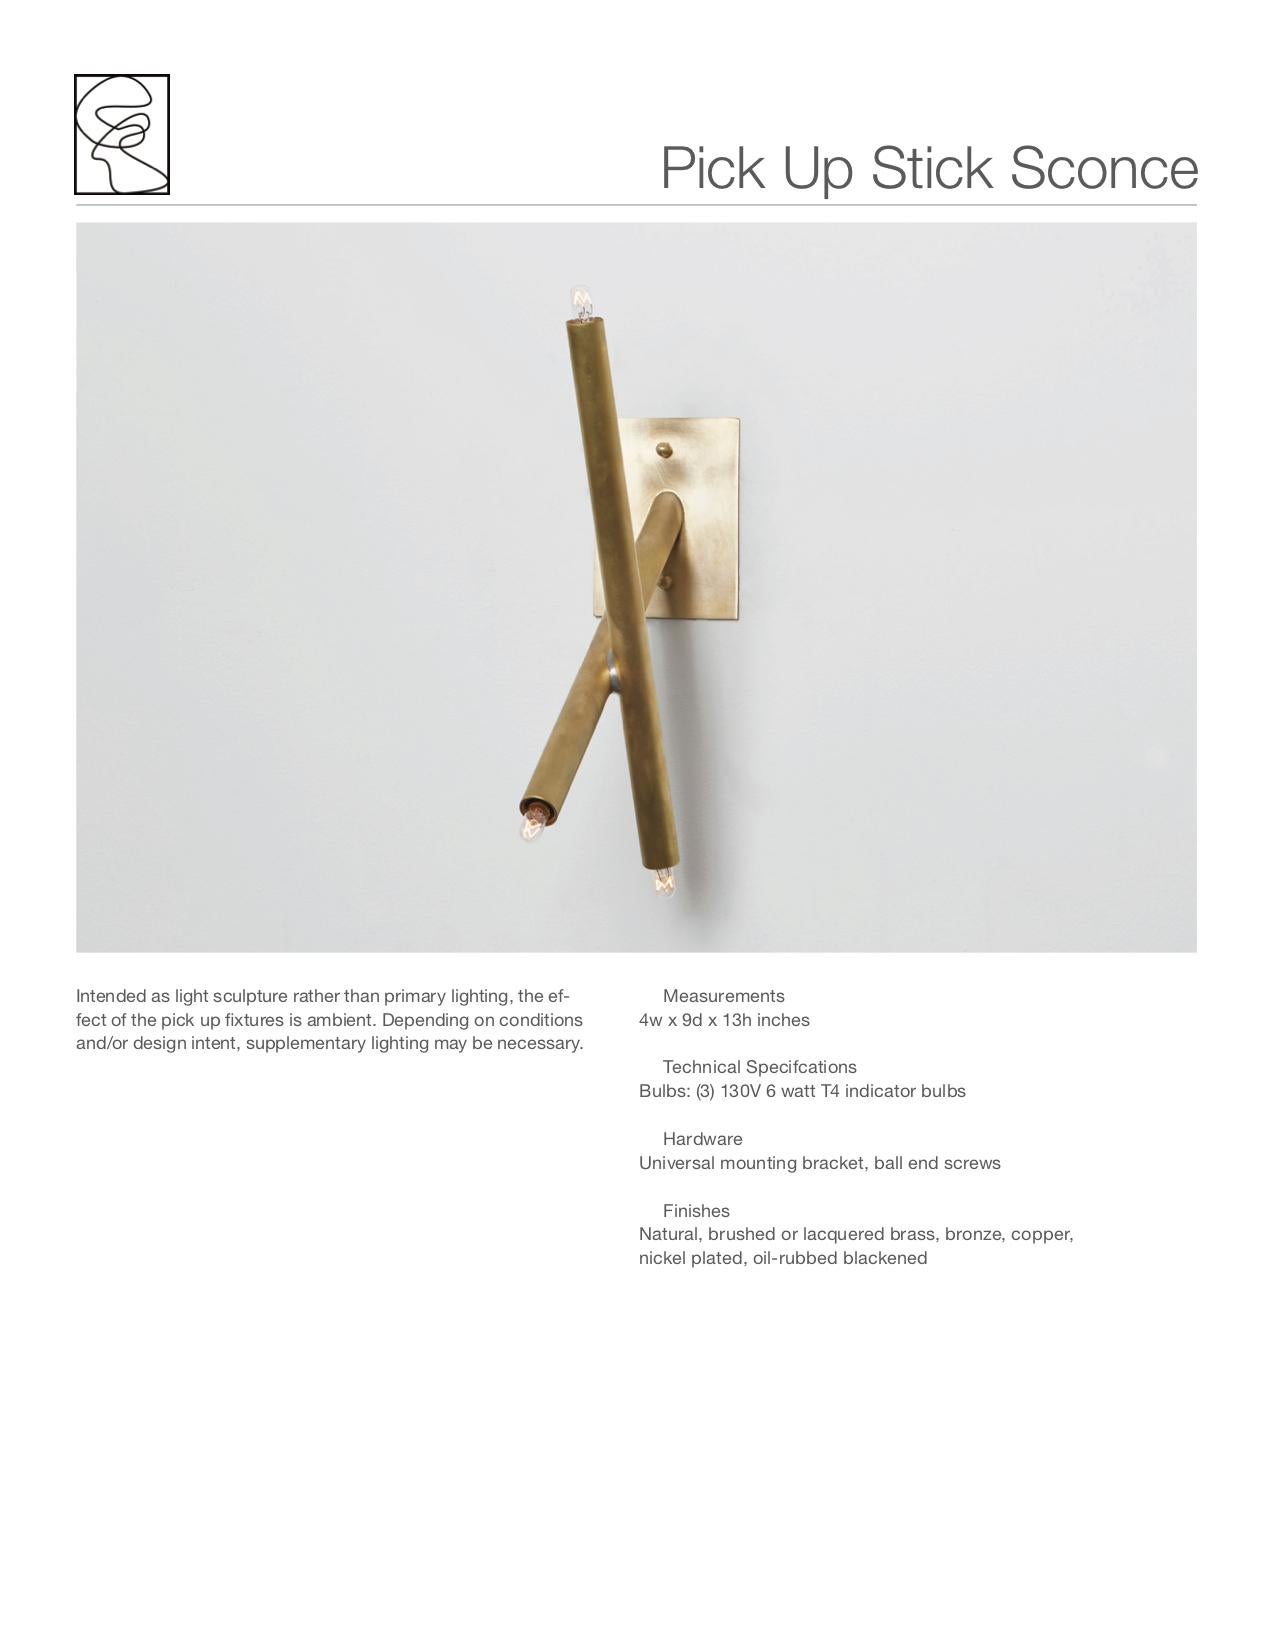 American Pick Up Stick Sconce in Brass by Cam Crockford For Sale